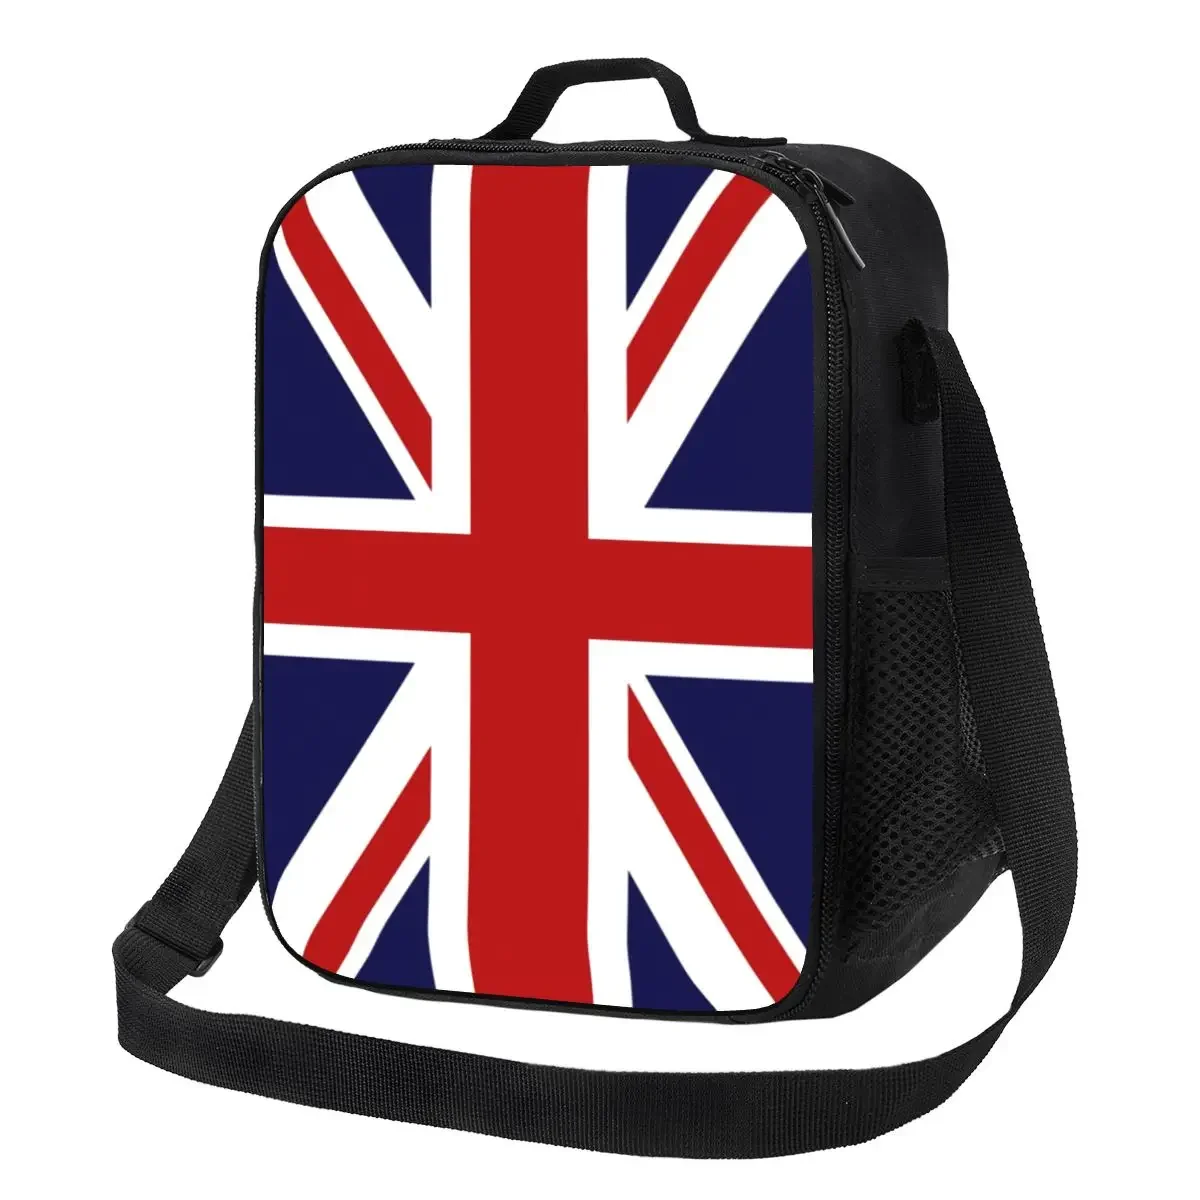 

Union Jack Flag Of The UK Resuable Lunch Box for Multifunction Thermal Cooler Food Insulated Lunch Bag School Children Student